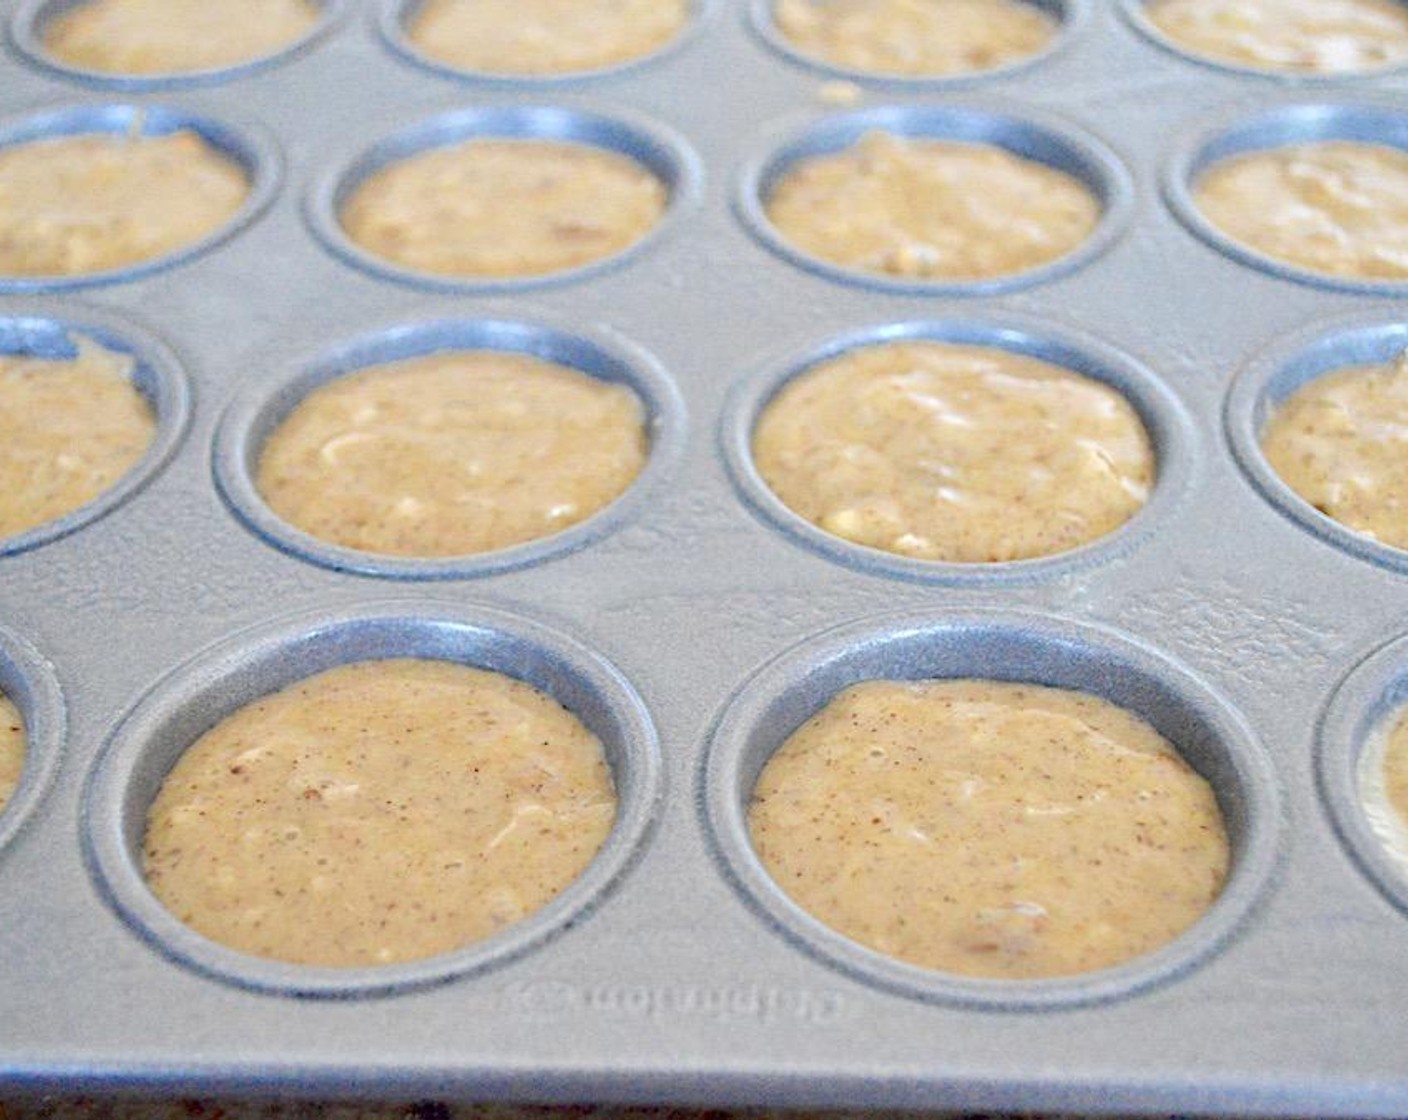 step 5 Into each well of a 24-well mini muffin tin sprayed very generously with Coconut Oil Cooking Spray (as needed) scoop enough batter to pretty much fill them to the top. Bake them for 15-20 minutes, until they are golden and a toothpick inserted into the center comes out clean.